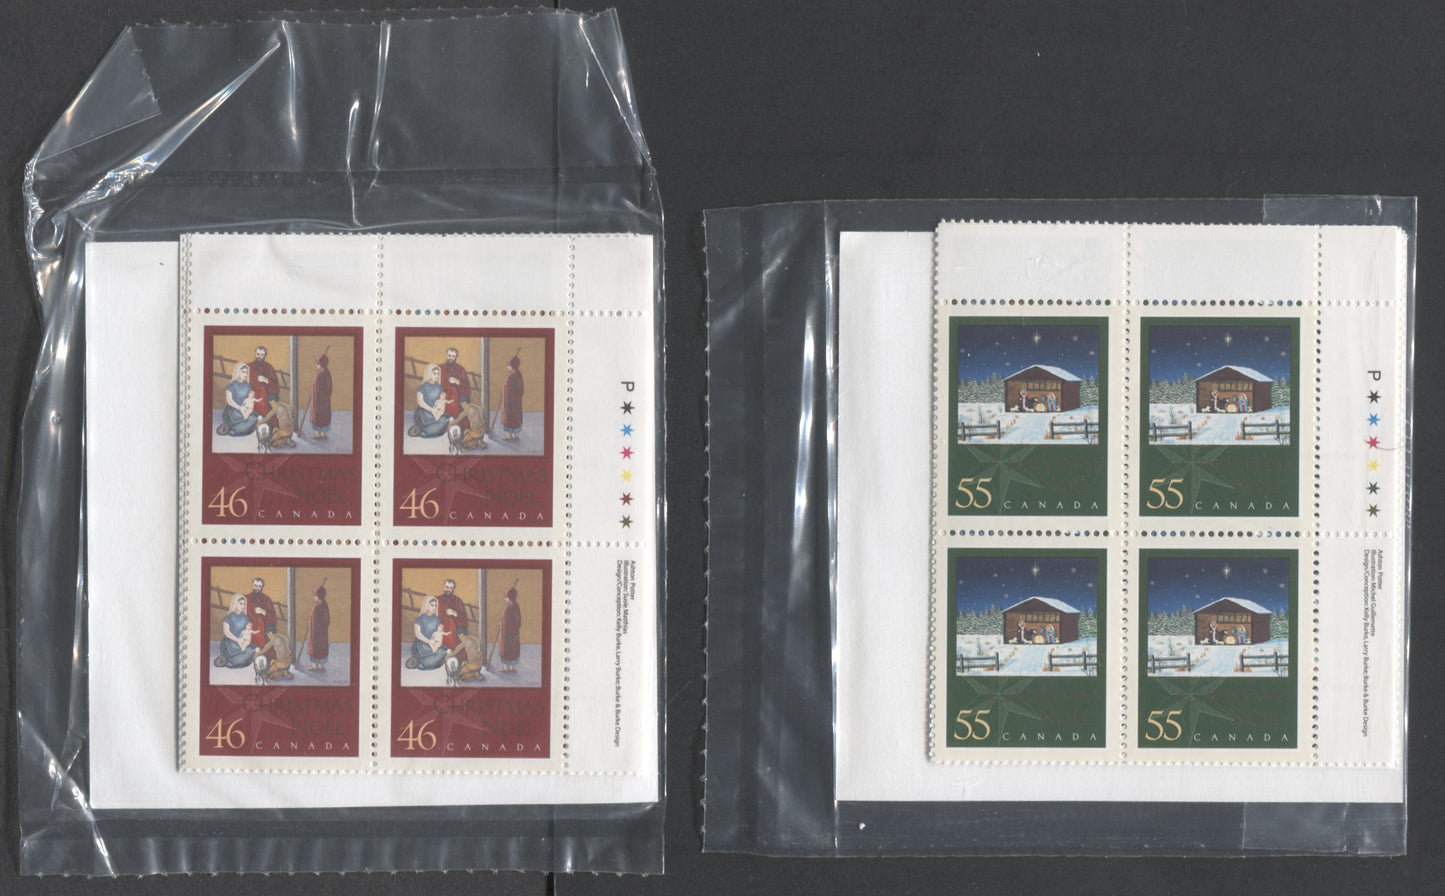 Lot 363 Canada #1873-1874 46c & 55c Multicolored Adoration of the Shepherds & Christmas Creche 2000 Christmas, Canada Post Sealed Pack of Inscription Blocks on Peterborough Paper With HB Type 8A Insert Card, VFNH, Unitrade Cat. $40